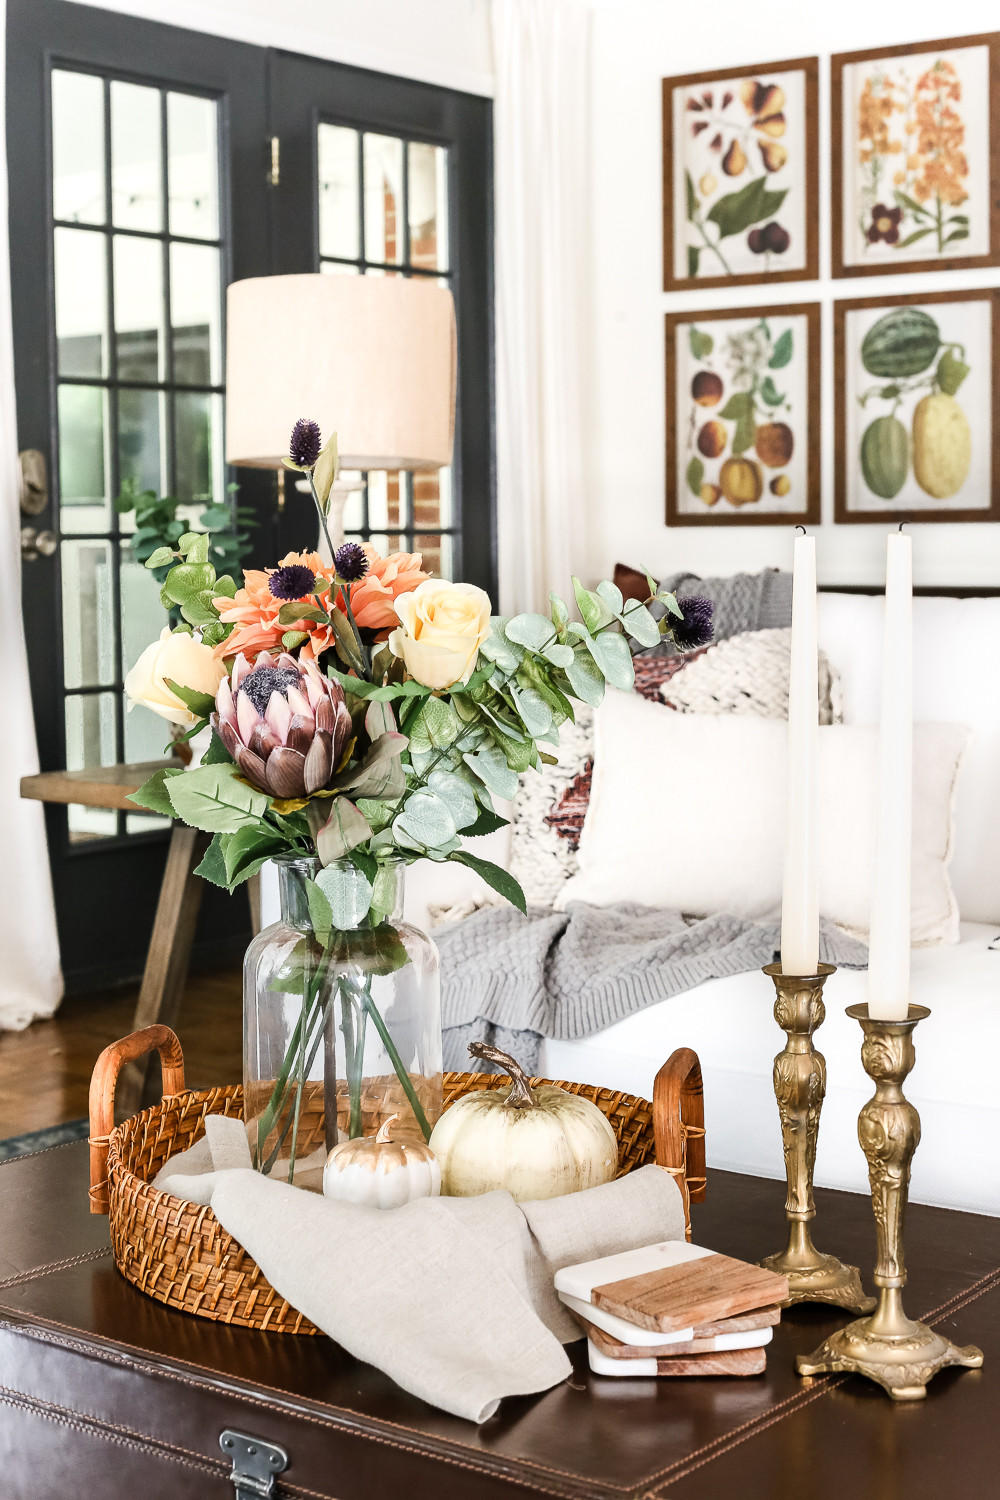 Fall Living Room Decor
 8 Fall Decorating Tips for a Bud and Fall Home Tour